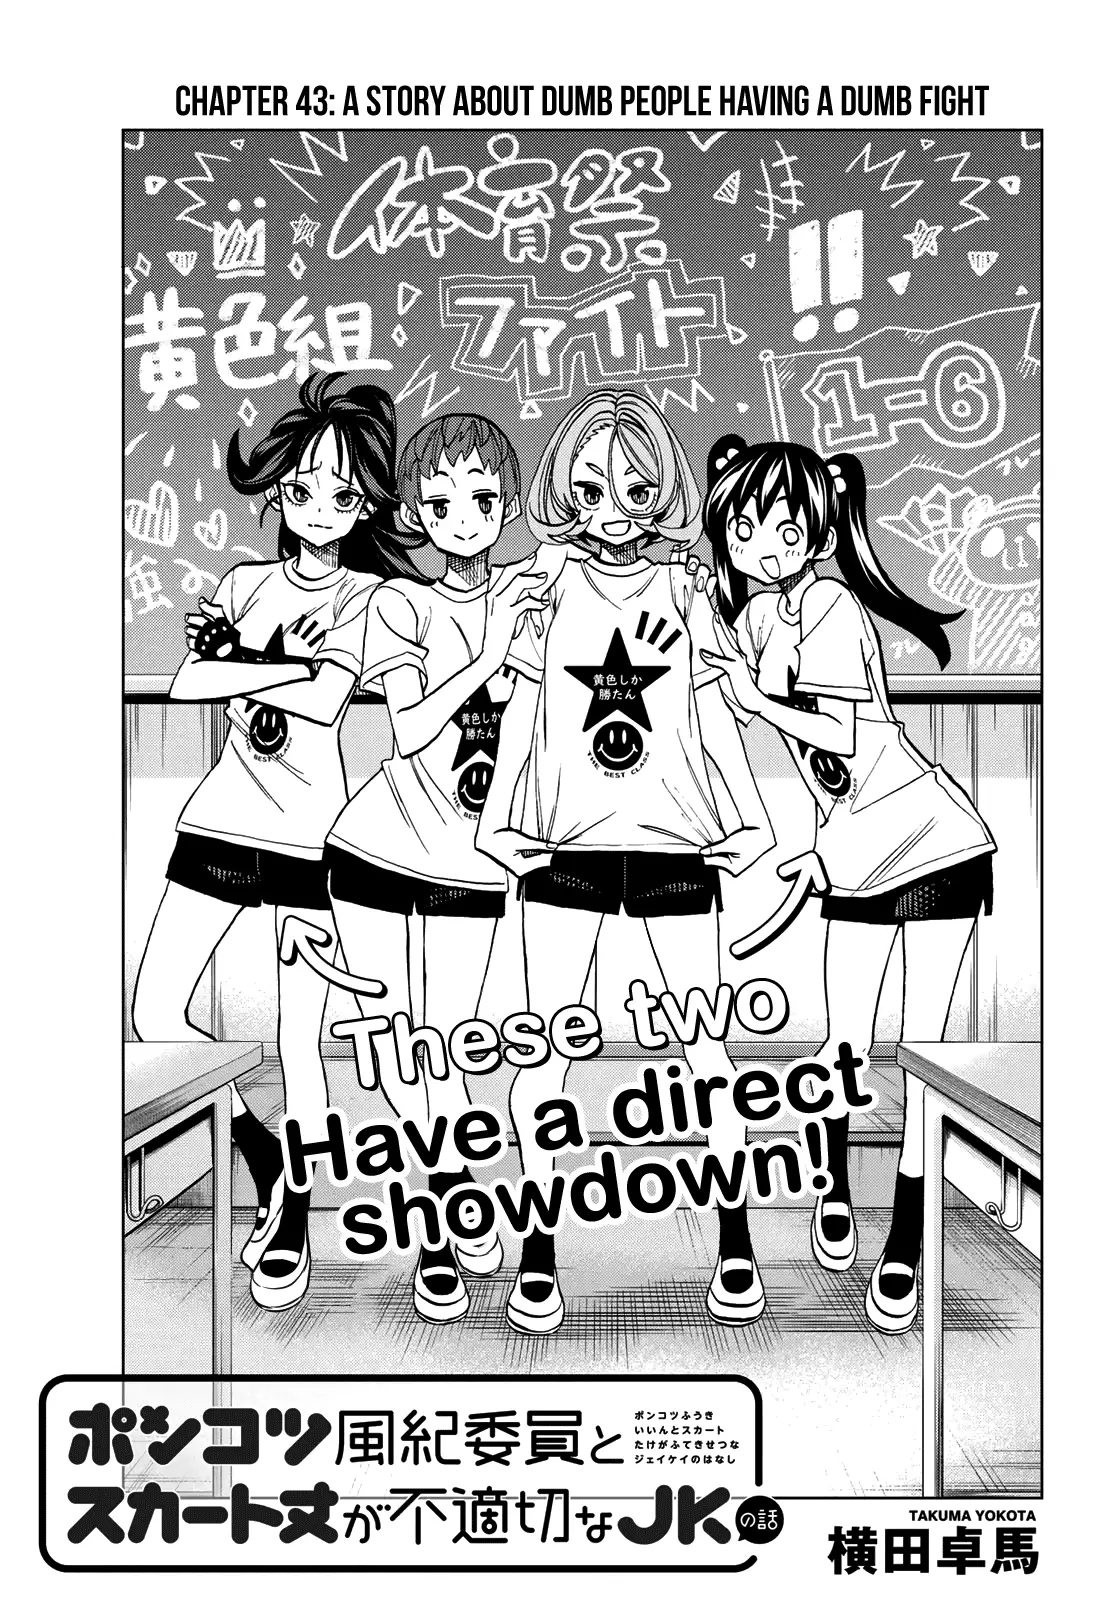 The Story Between A Dumb Prefect And A High School Girl With An Inappropriate Skirt Length - 43 page 1-37da5bf1